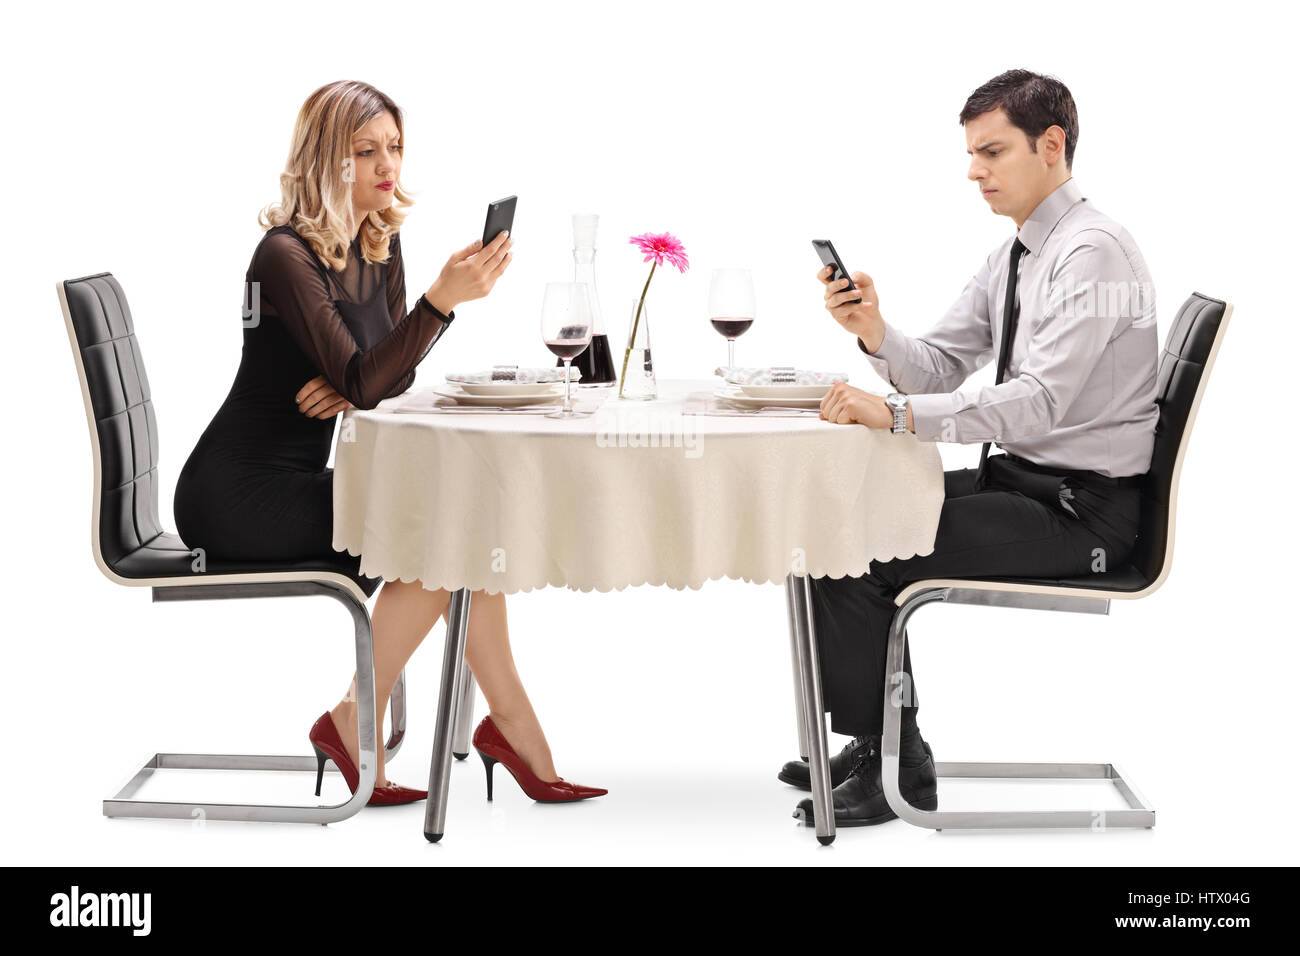 Young man and woman sitting at a restaurant table and looking at their phones isolated on white background Stock Photo